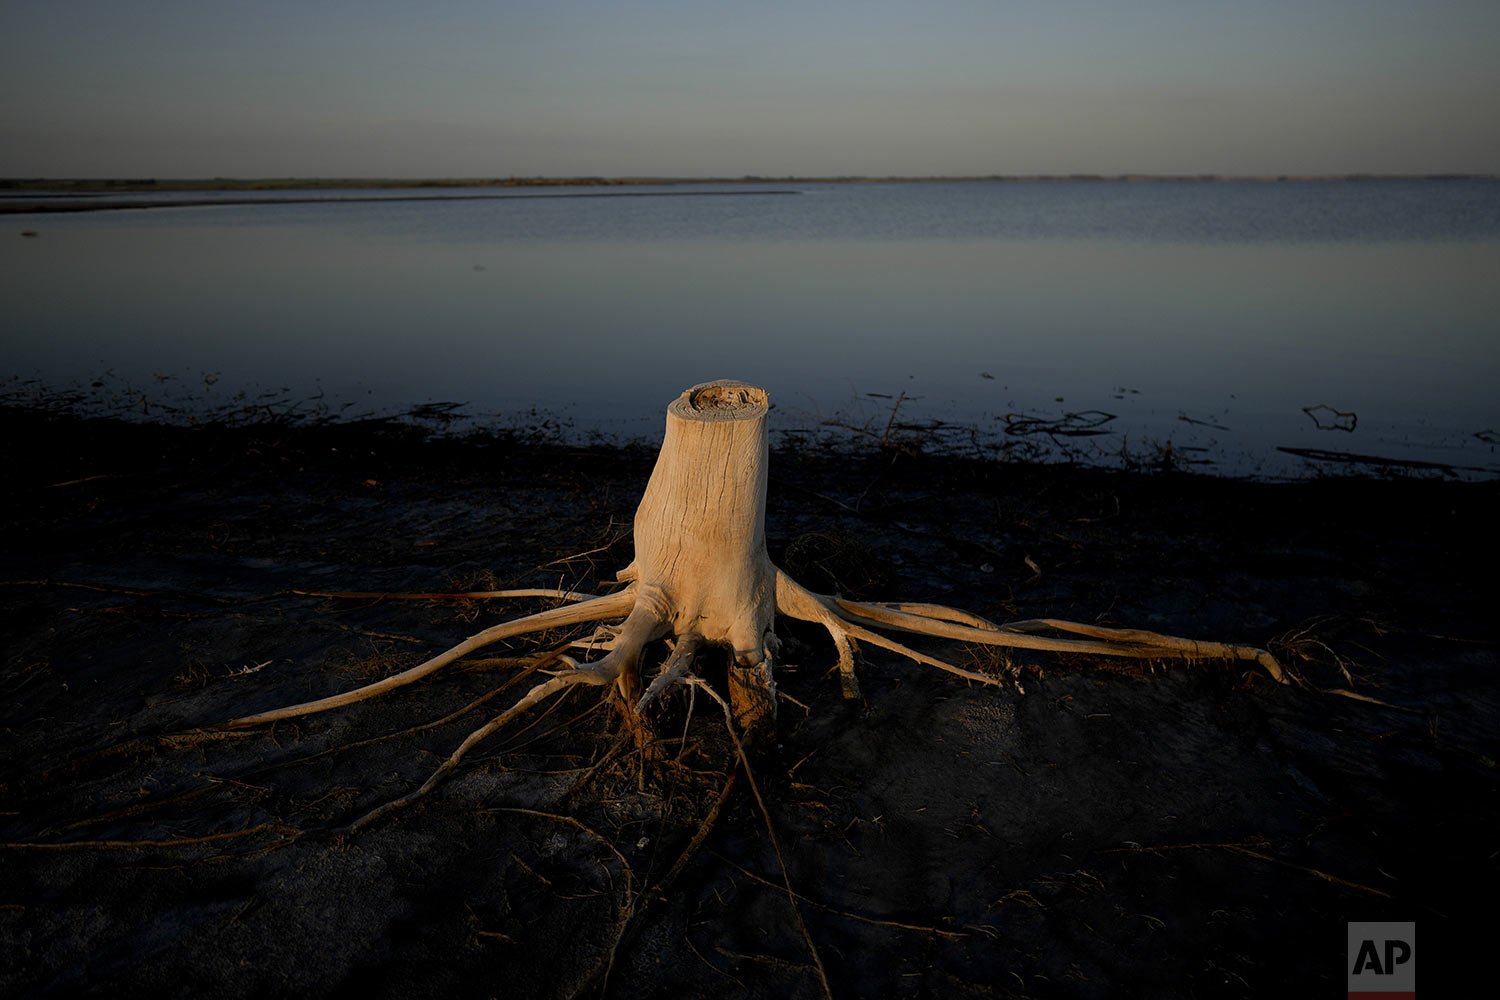  A cut and dried up tree trunk stands on the lakeshore of the abandoned Villa Epecuen, Argentina, Oct. 8, 2021. The Argentine spa town was a mecca of tourism for much of the 20th century, until the lake poured through a broken embankment in 1985 and 